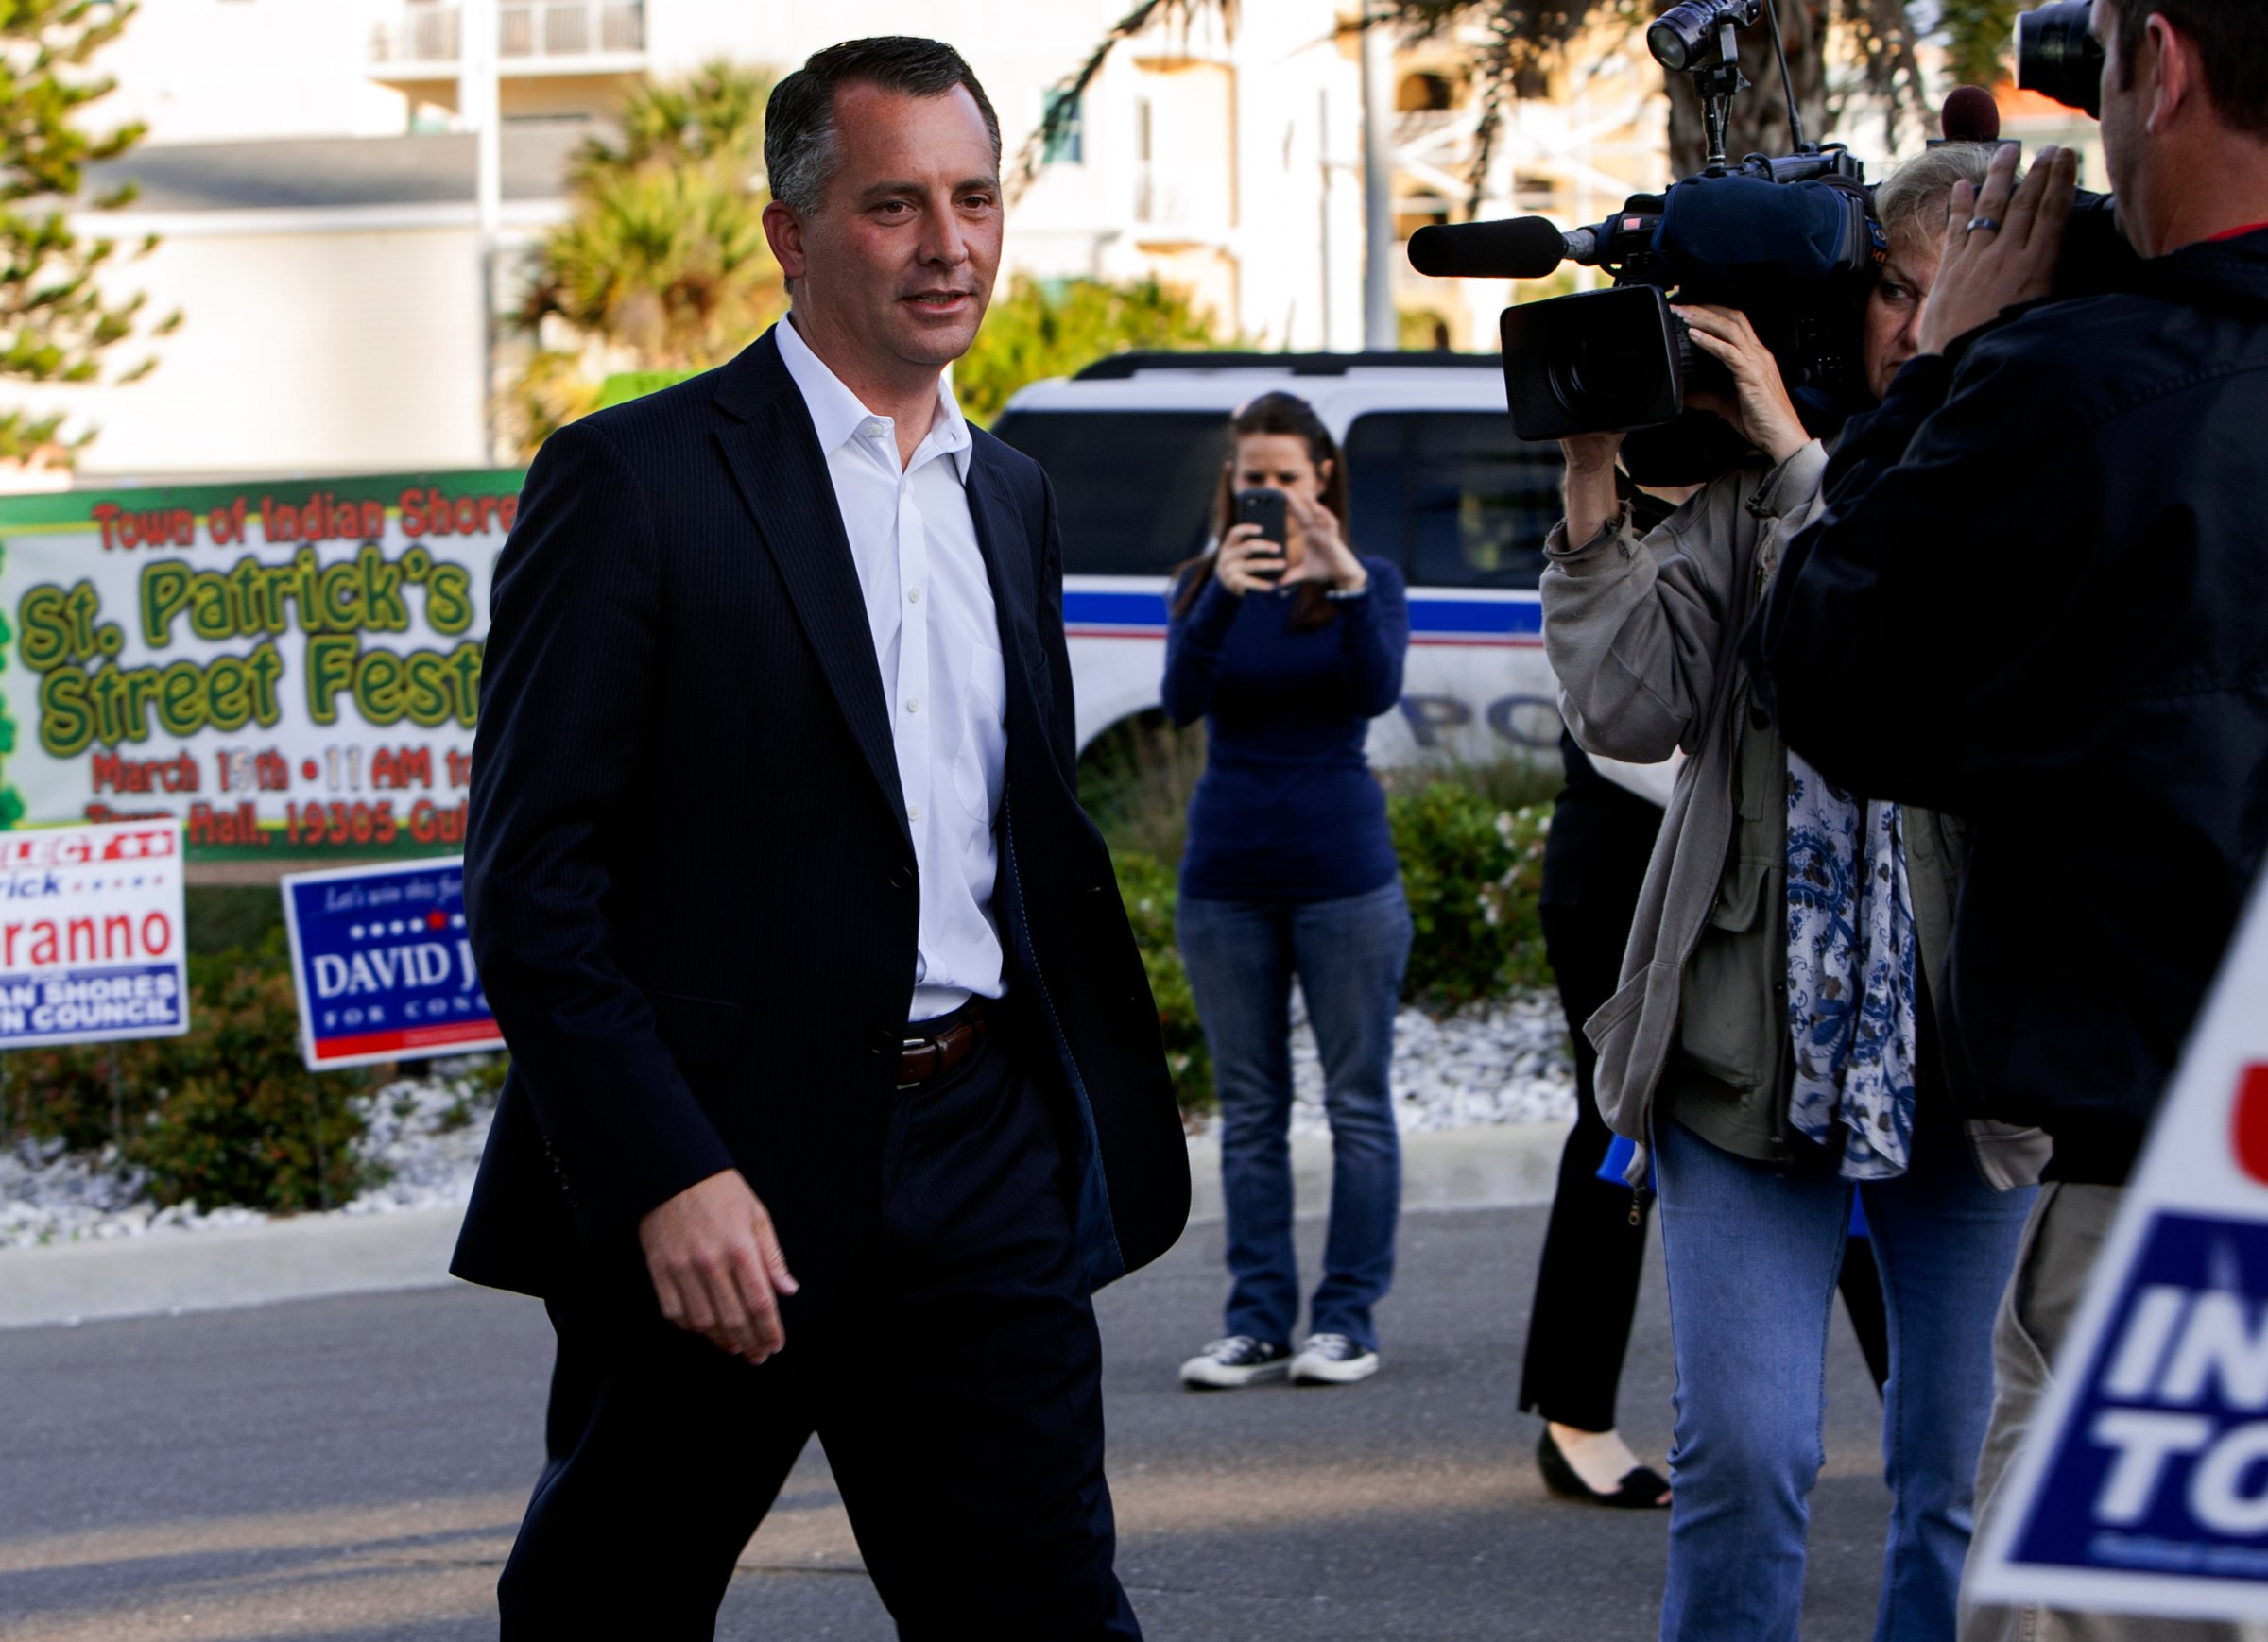 Candidate David Jolly arrives at the Indian Shores Town Hall to place his vote in the special election for Florida 13th Congressional District in Indian Shores, Fla., March 11, 2014.